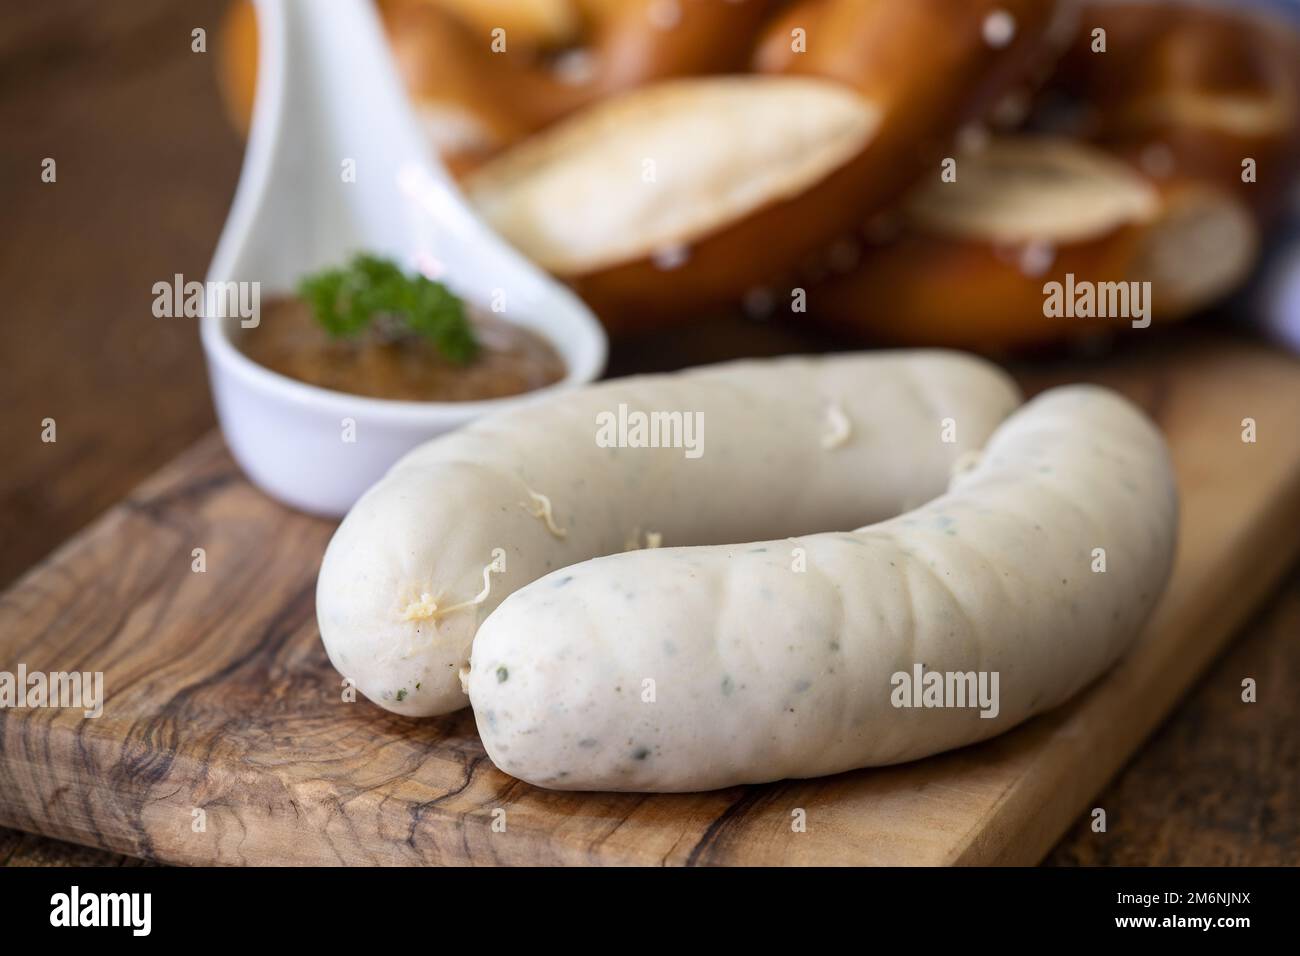 Pair of Bavarian veal sausages Stock Photo